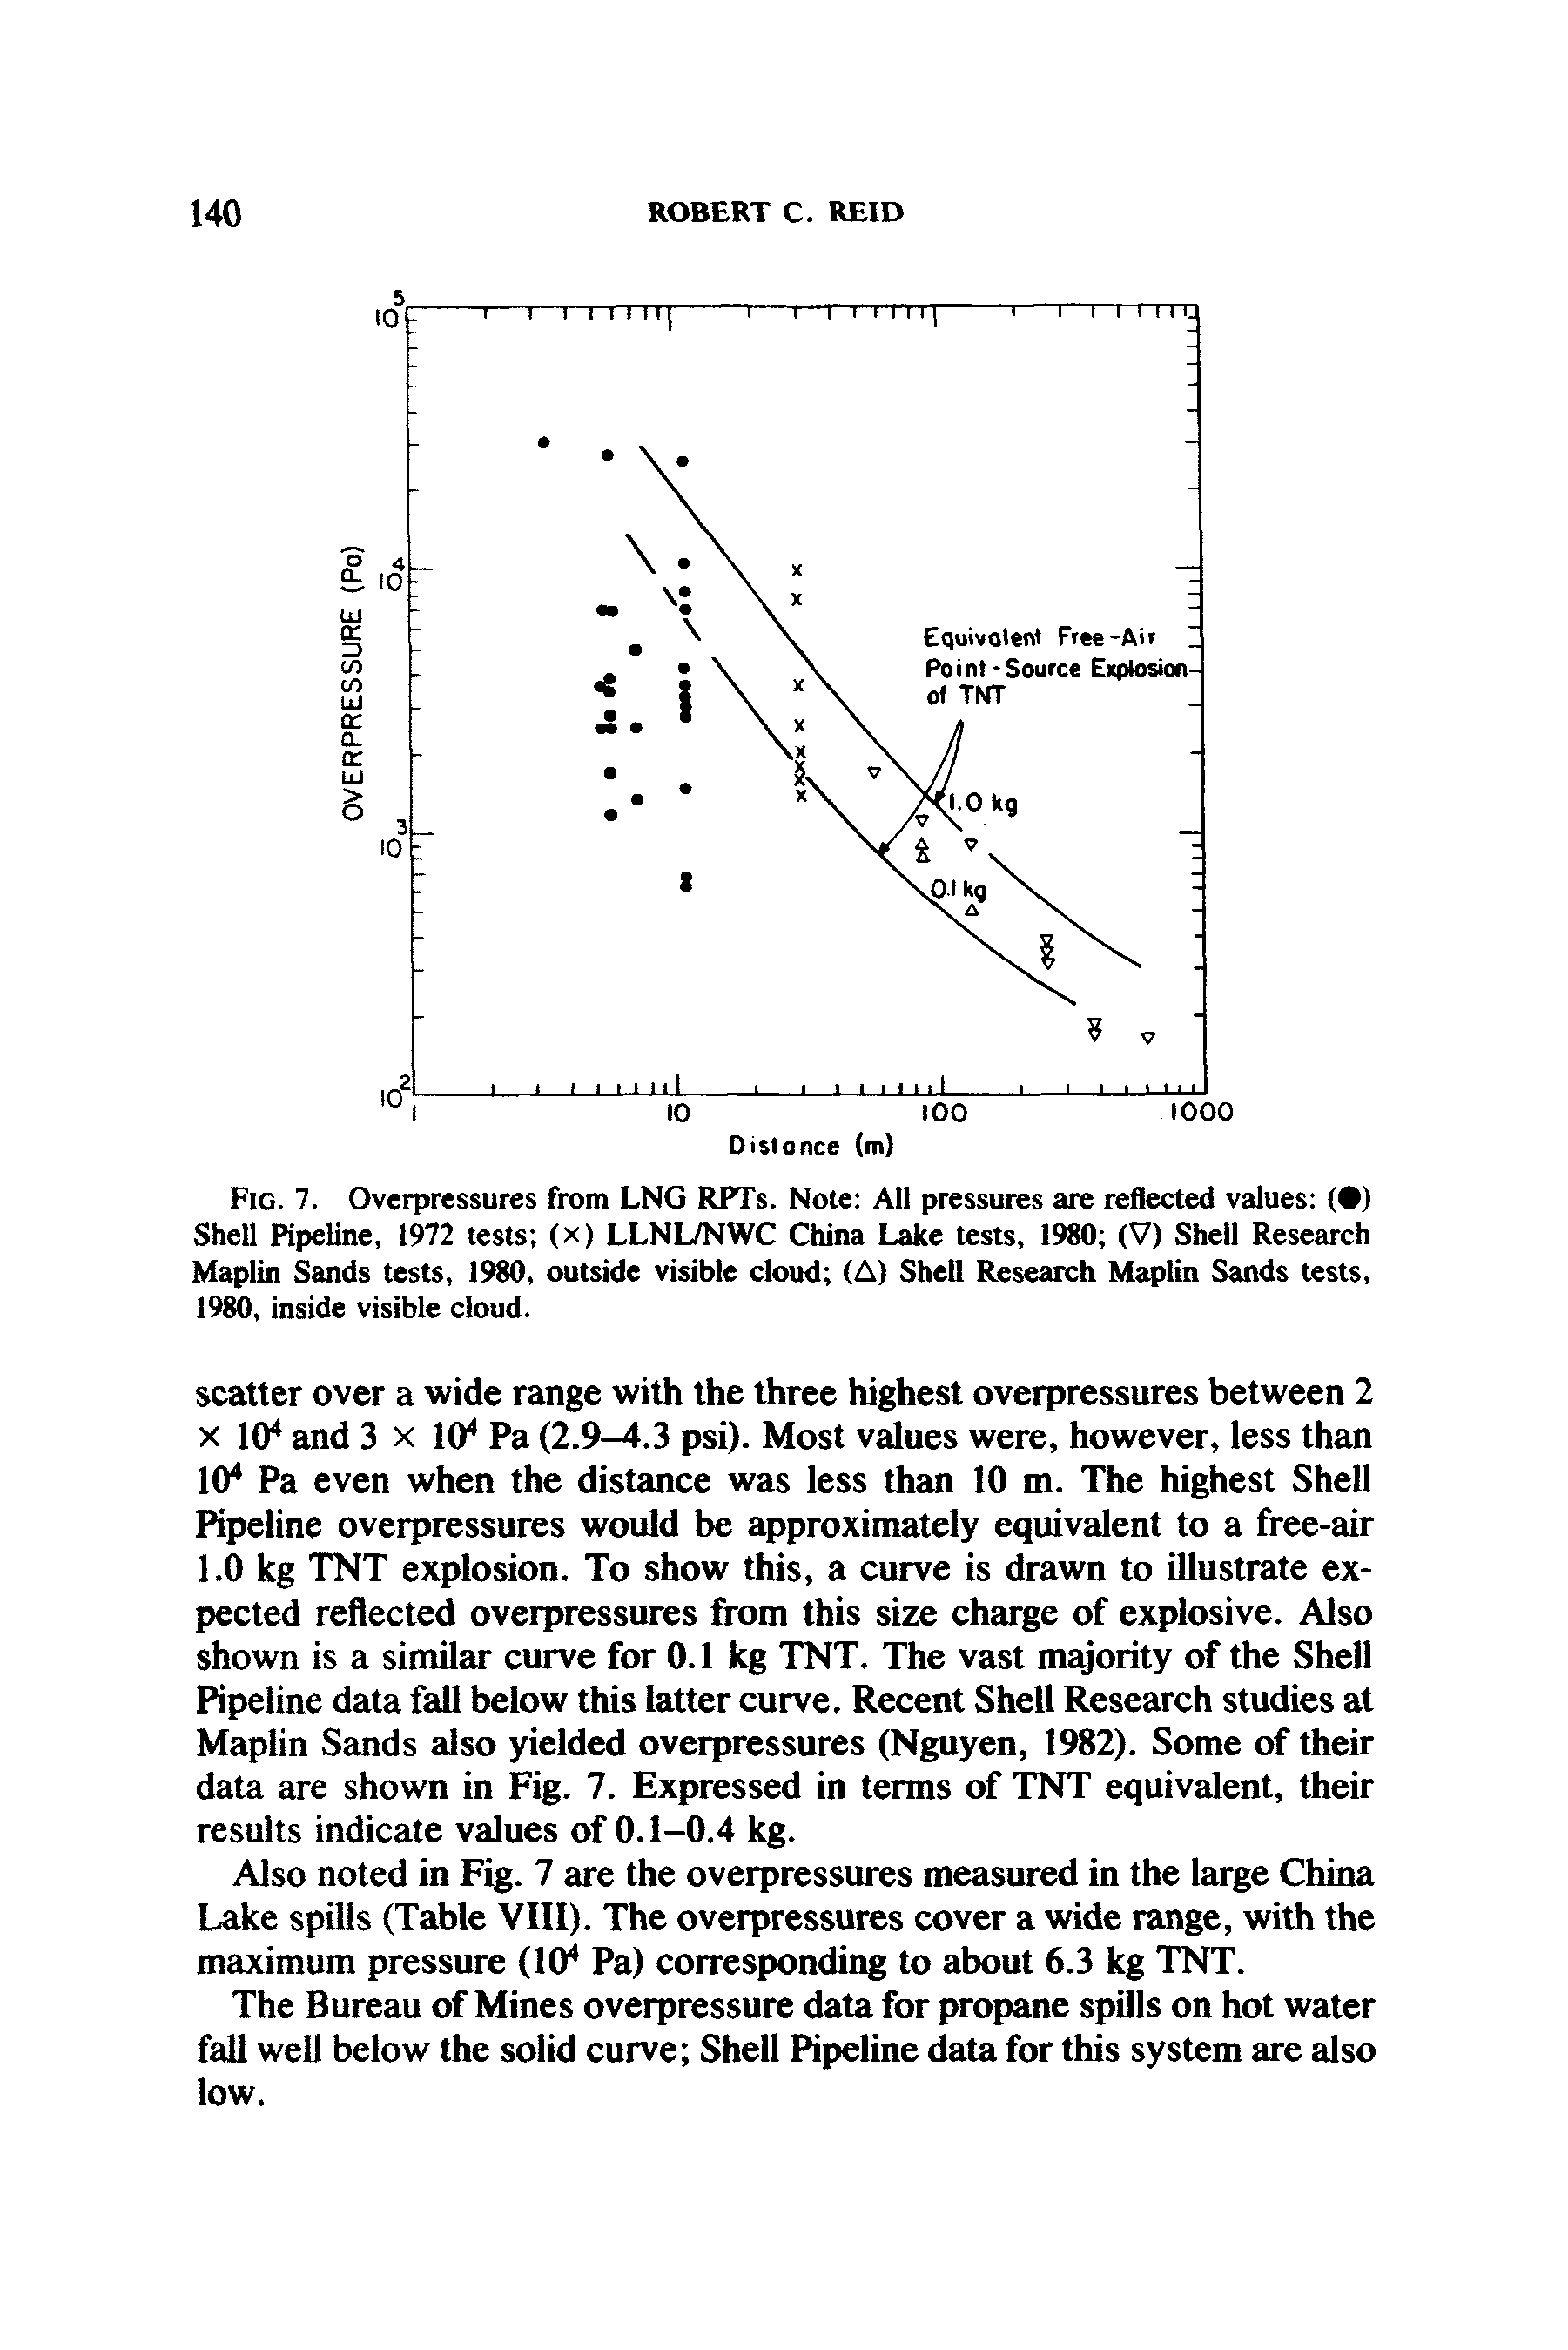 Fig. 7. Overpressures from LNG RPTs. Note All pressures are reflected values ( ) Shell Pipeline, 1972 tests (x) LLNL/NWC China Lake tests, 1980 (V) Shell Research Maplin Sands tests, 1980, outside visible cloud (A) Shell Research Maplin Sands tests, 1980, inside visible cloud.